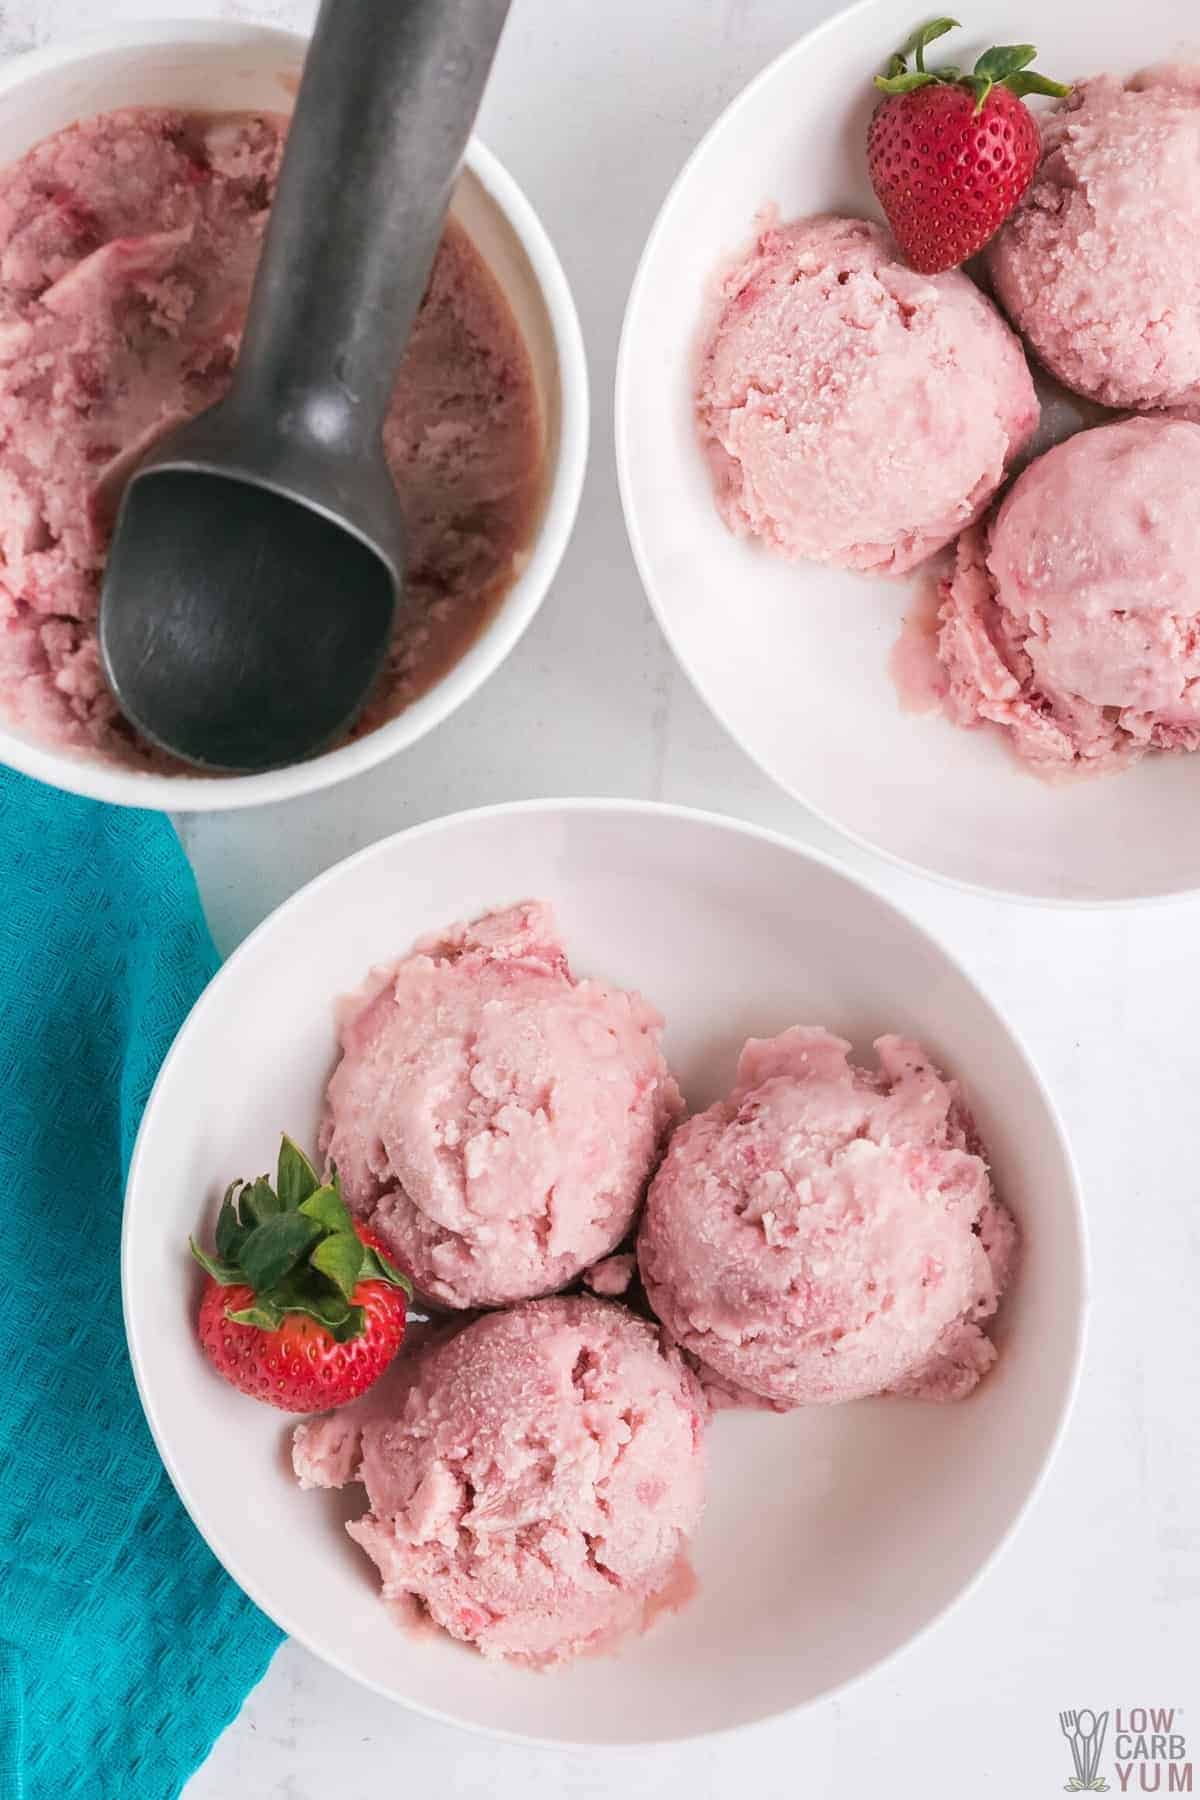 scoops of strawberry ice cream in white bowls